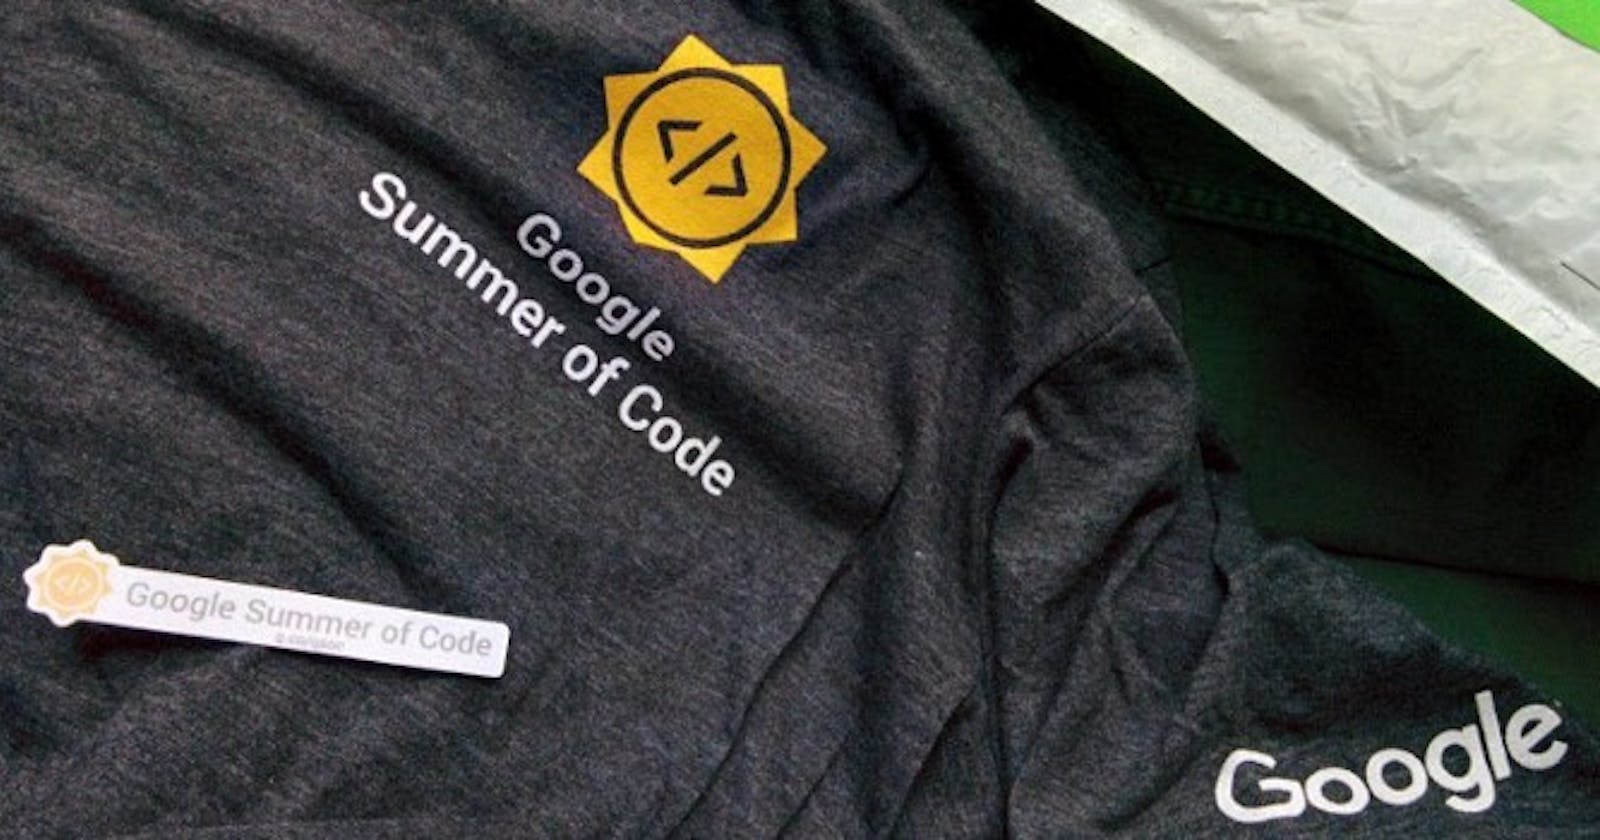 Have you heard about Google Summer of Code (GSoC)?